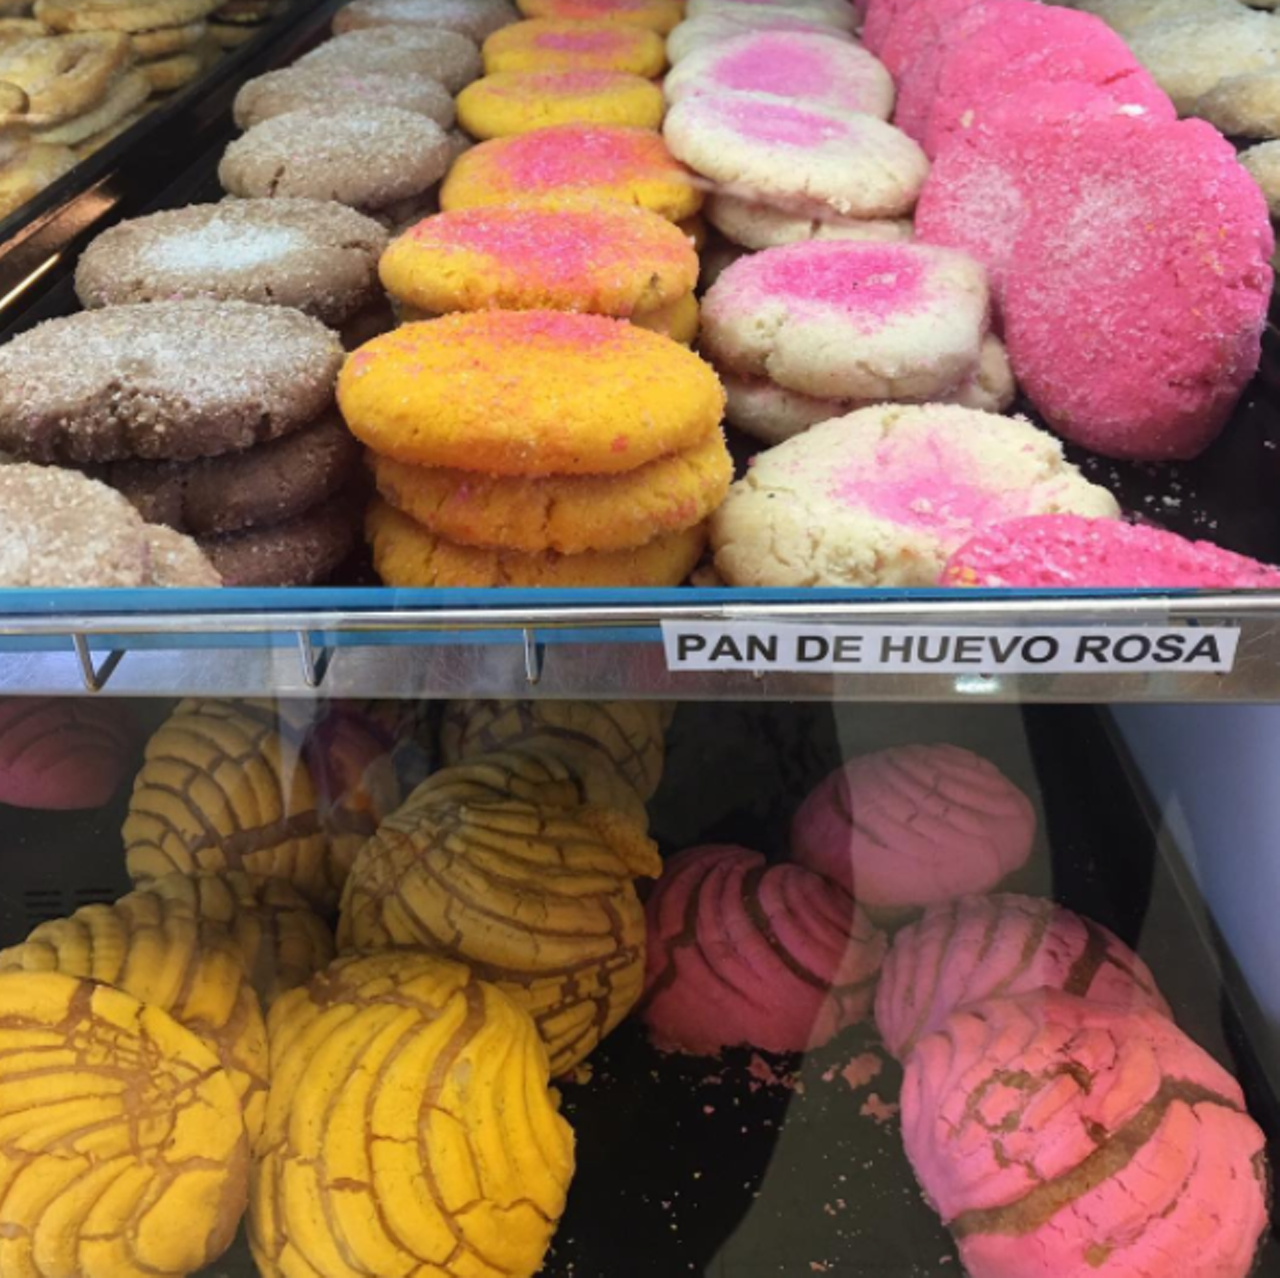 El Folklor Bakery
2604 S. Hackberry (210) 532-3767
Conchas, empanadas, tres leches and all your other favorites can be found here. 
Photo via Instagram, mirindee